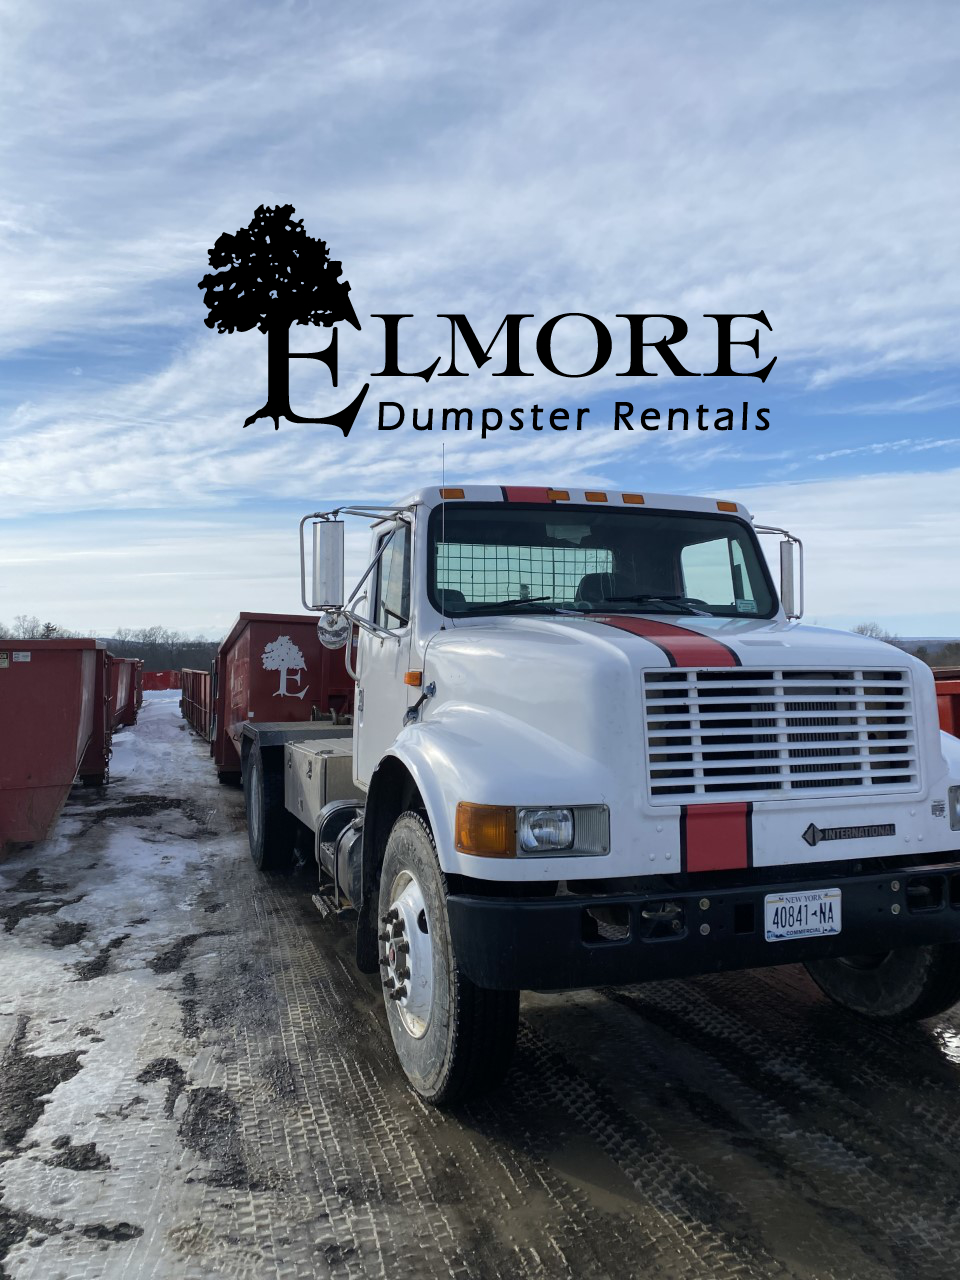 Construction Dumpster Rental Elmore Dumpster Rentals Trumansburg NY Contractors Use Year-Round